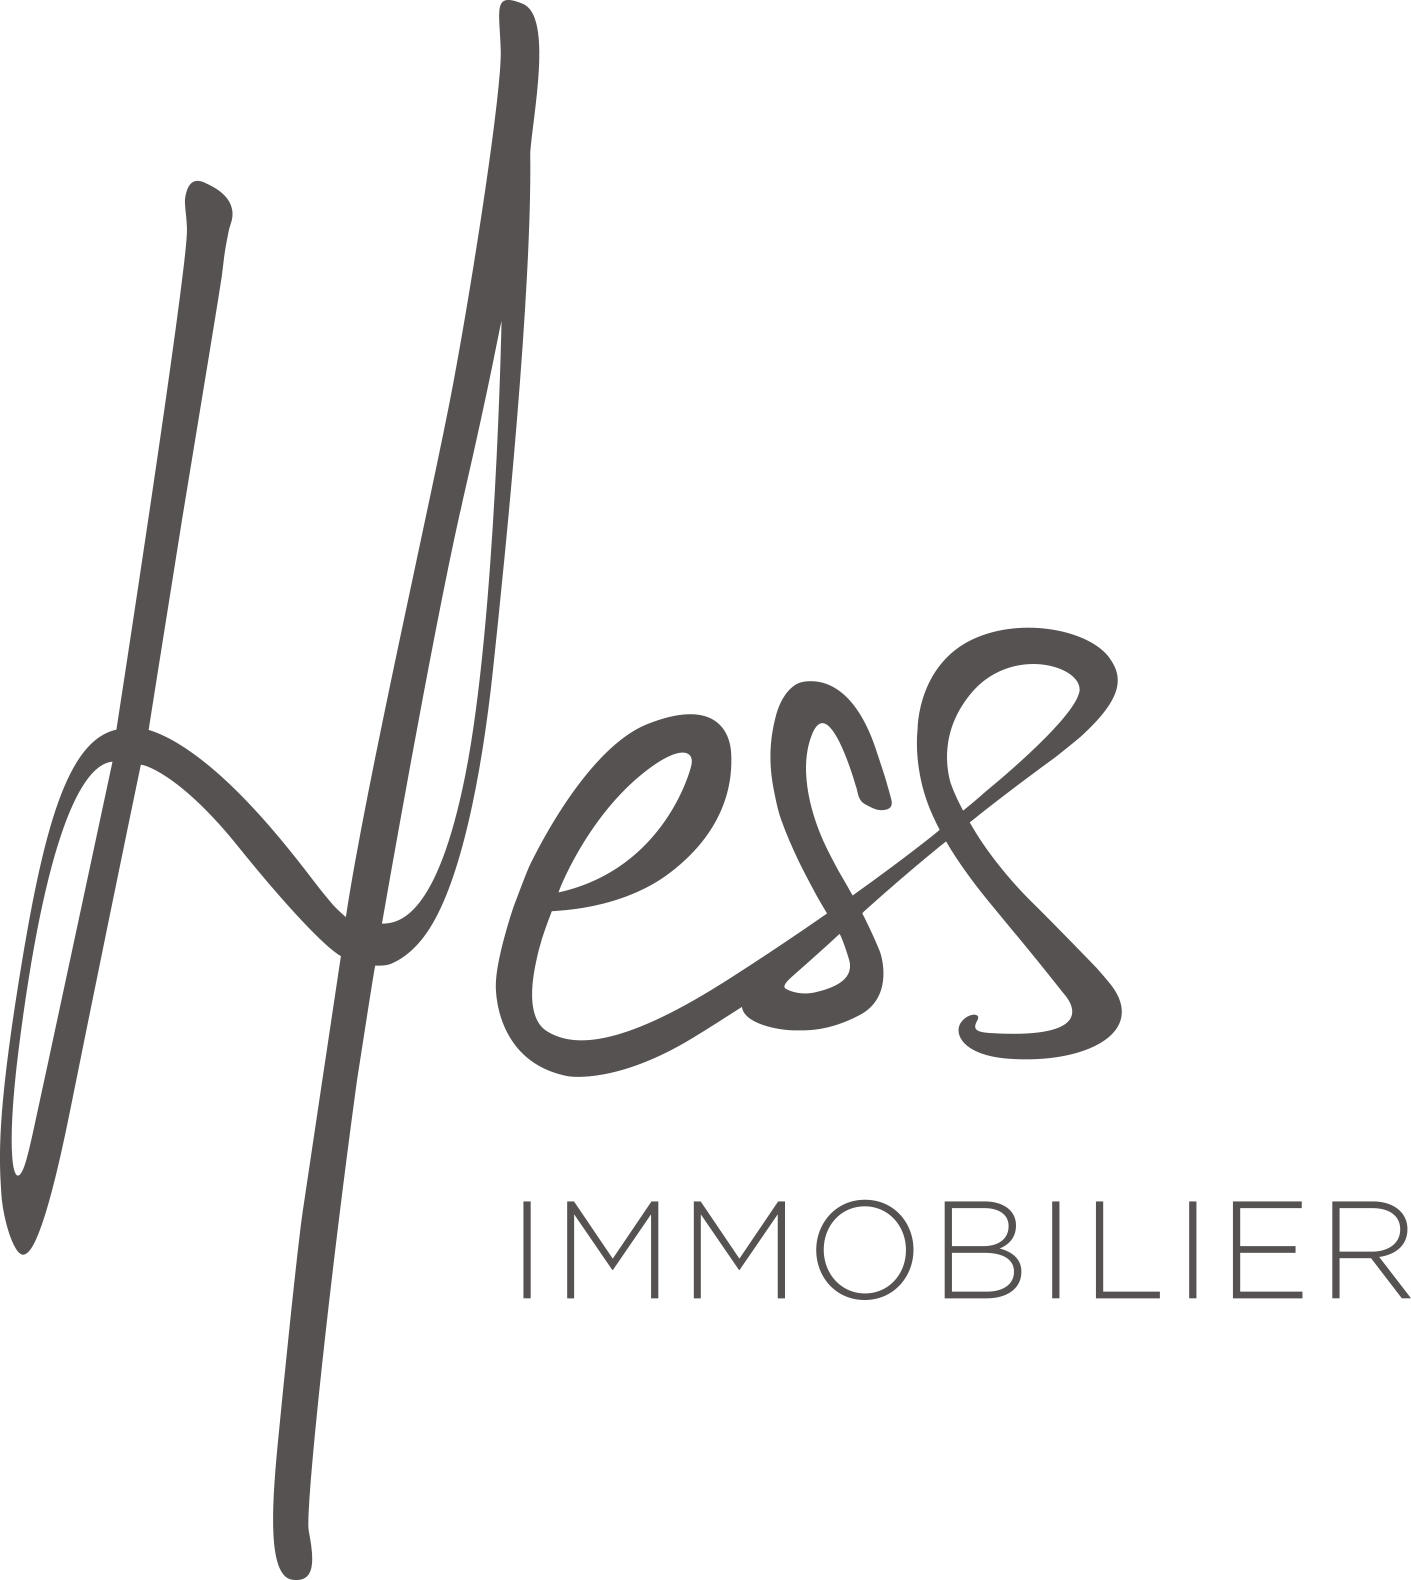 Hess Immobilier